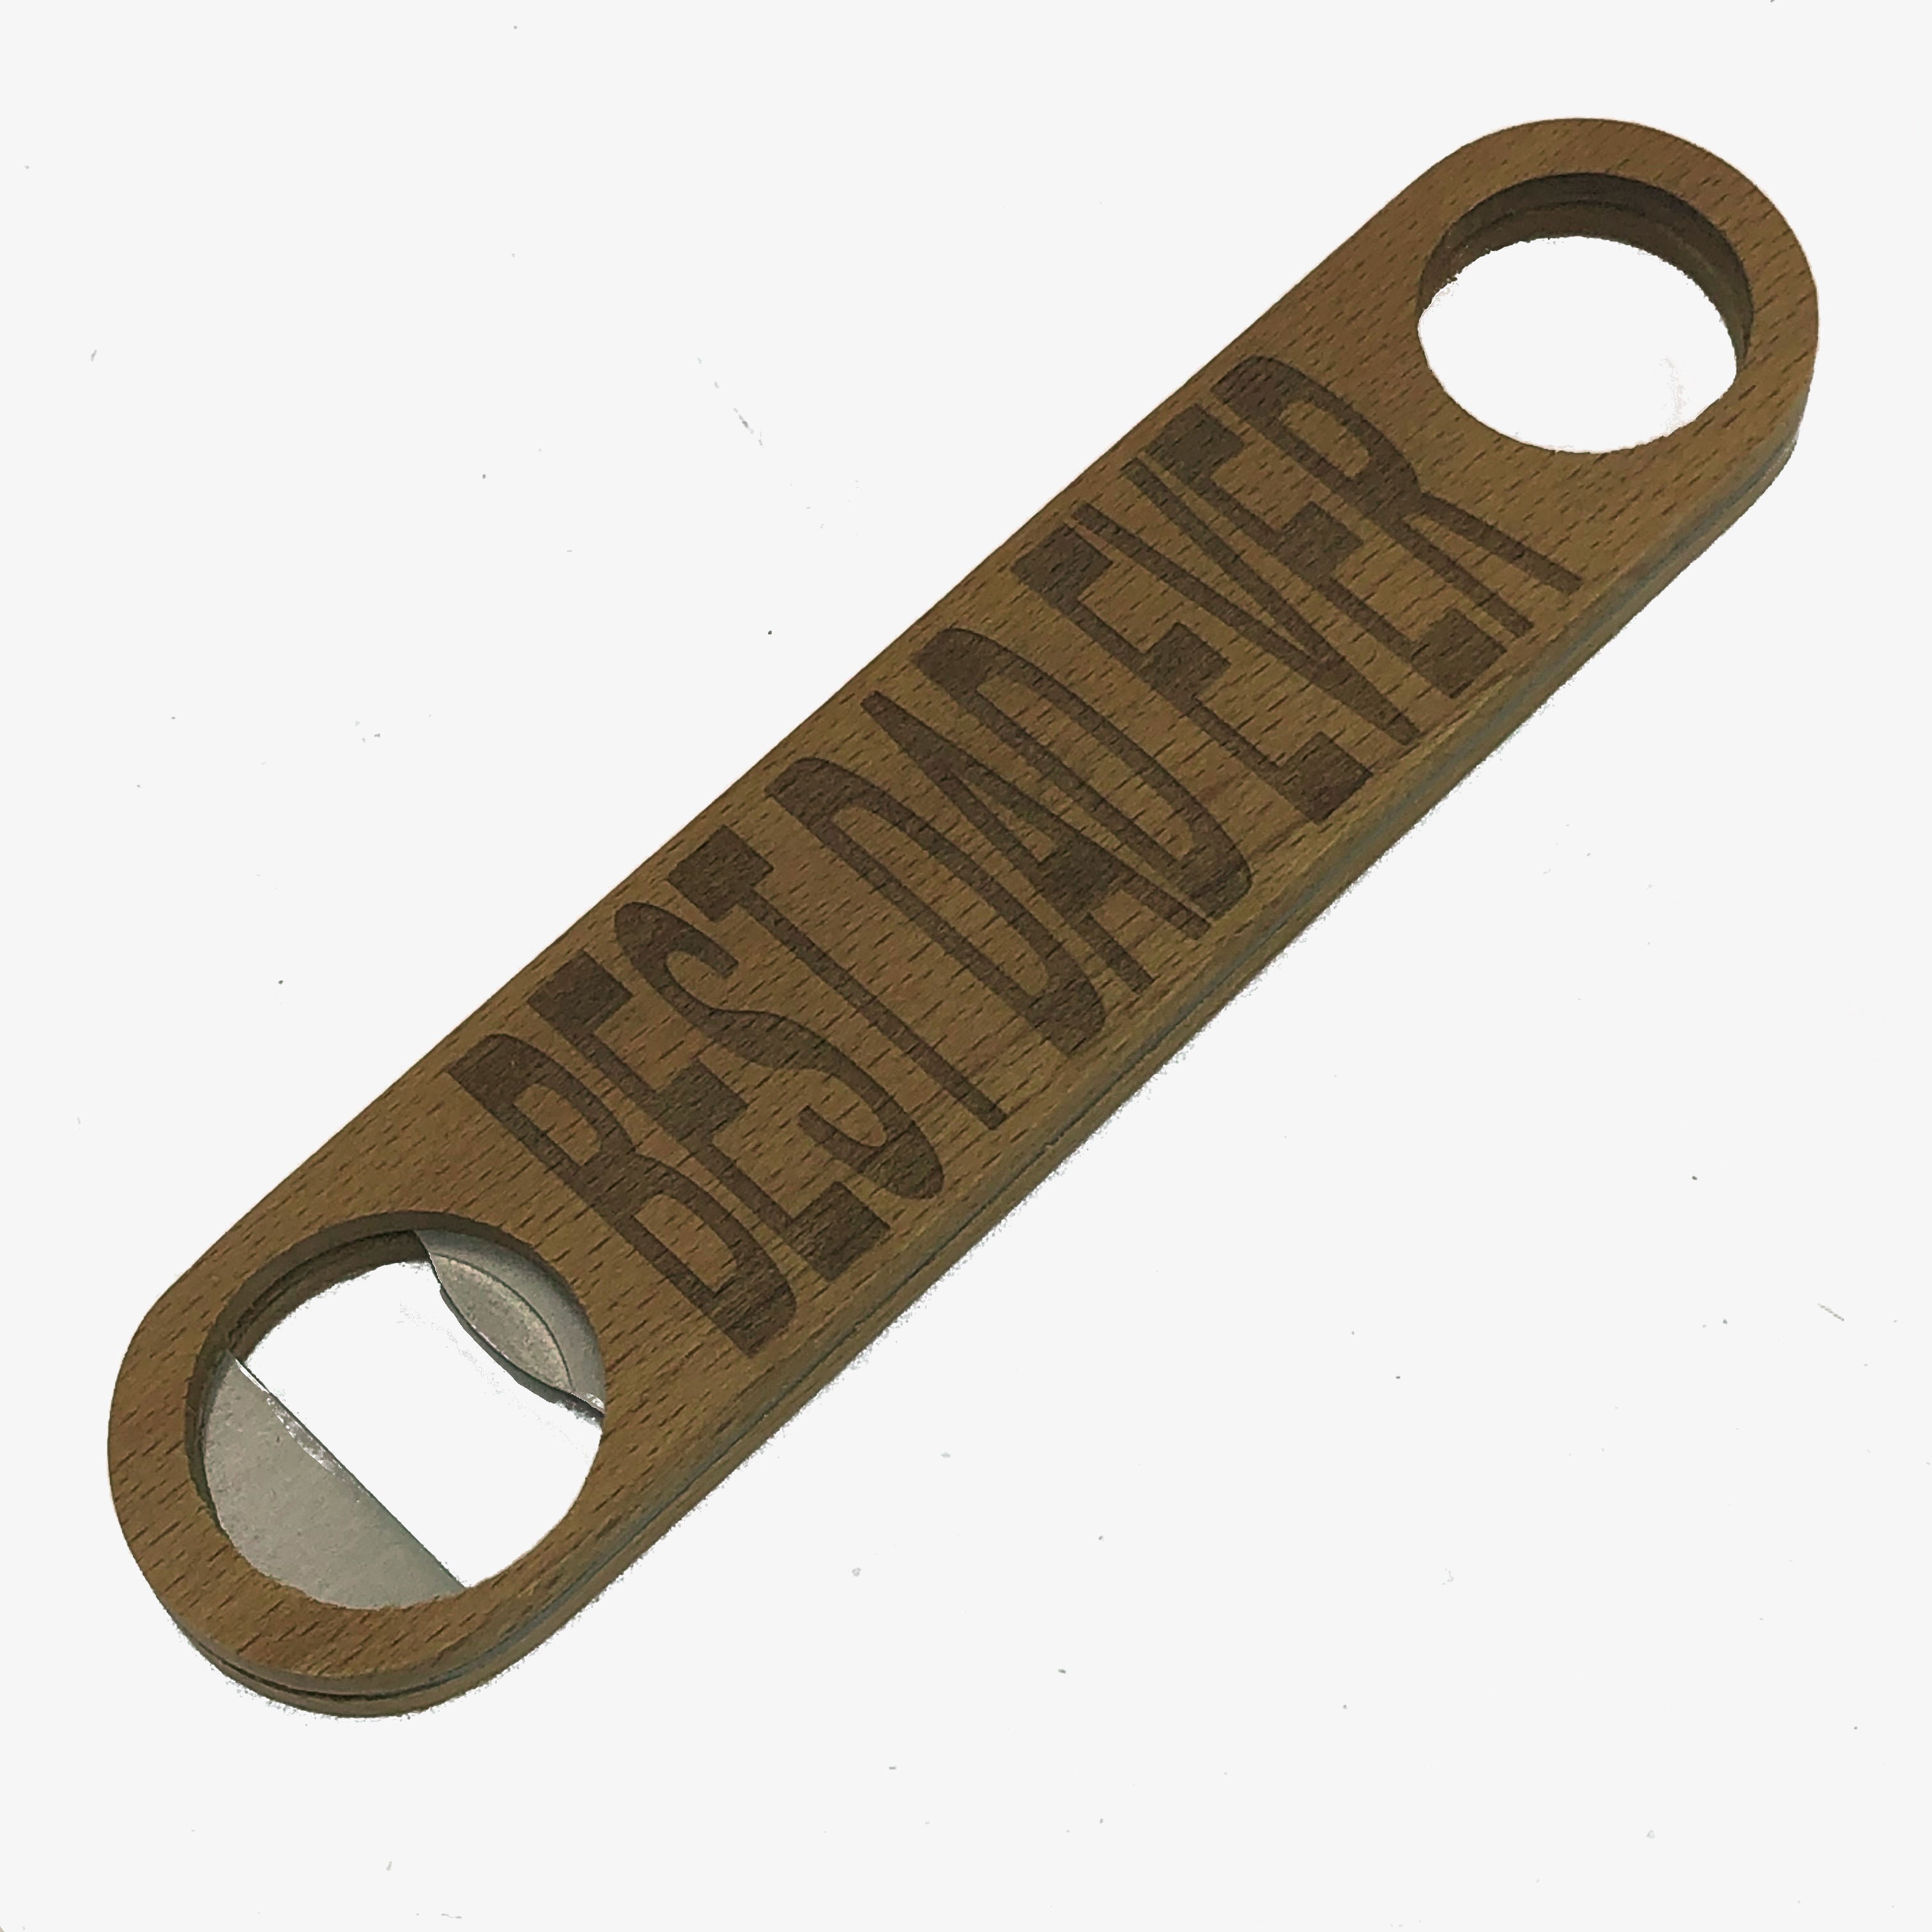 Wooden bottle opener gift for father - best dad ever